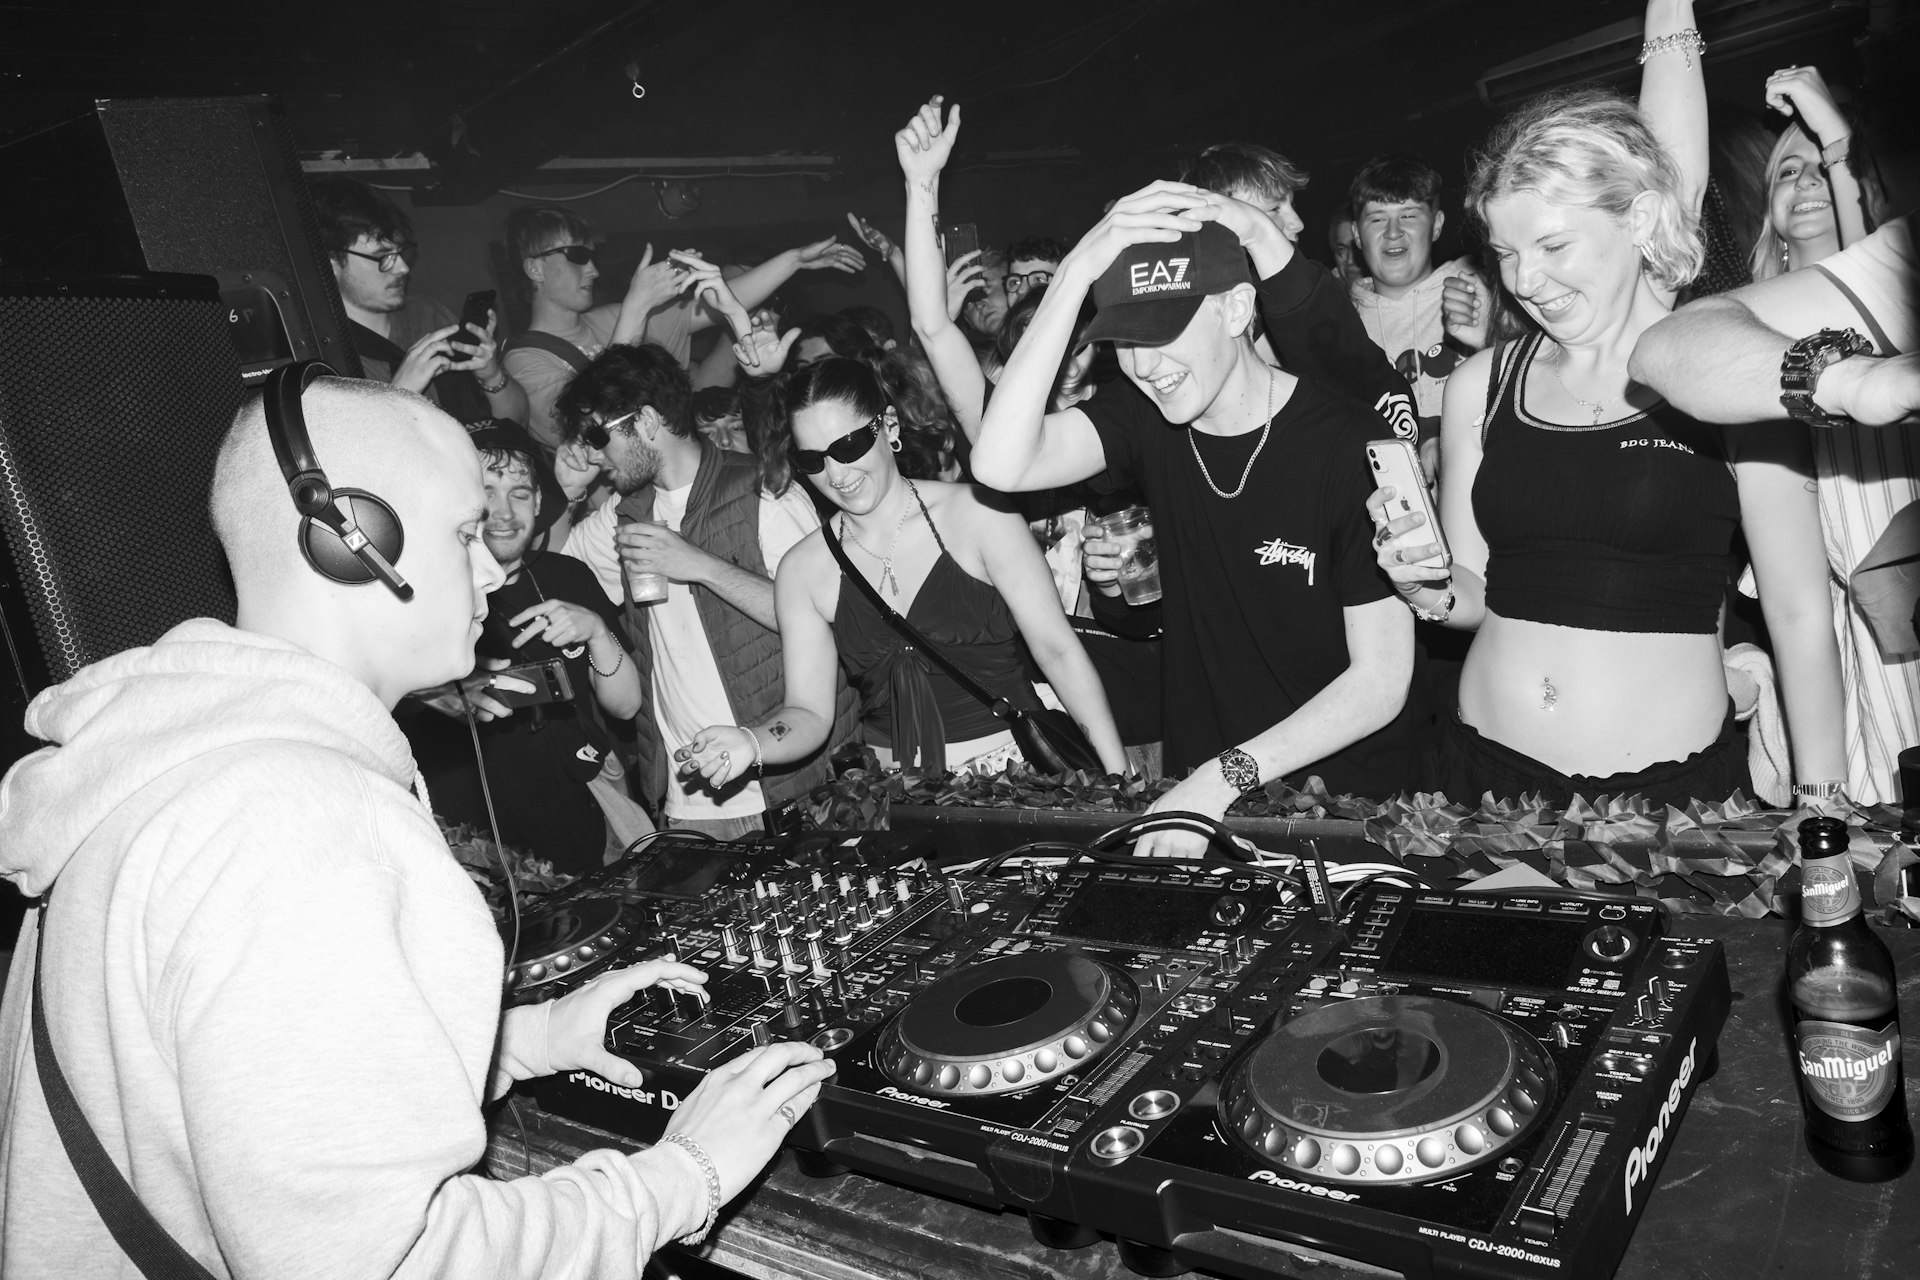 The events collective bringing inner-city raves to Cornwall